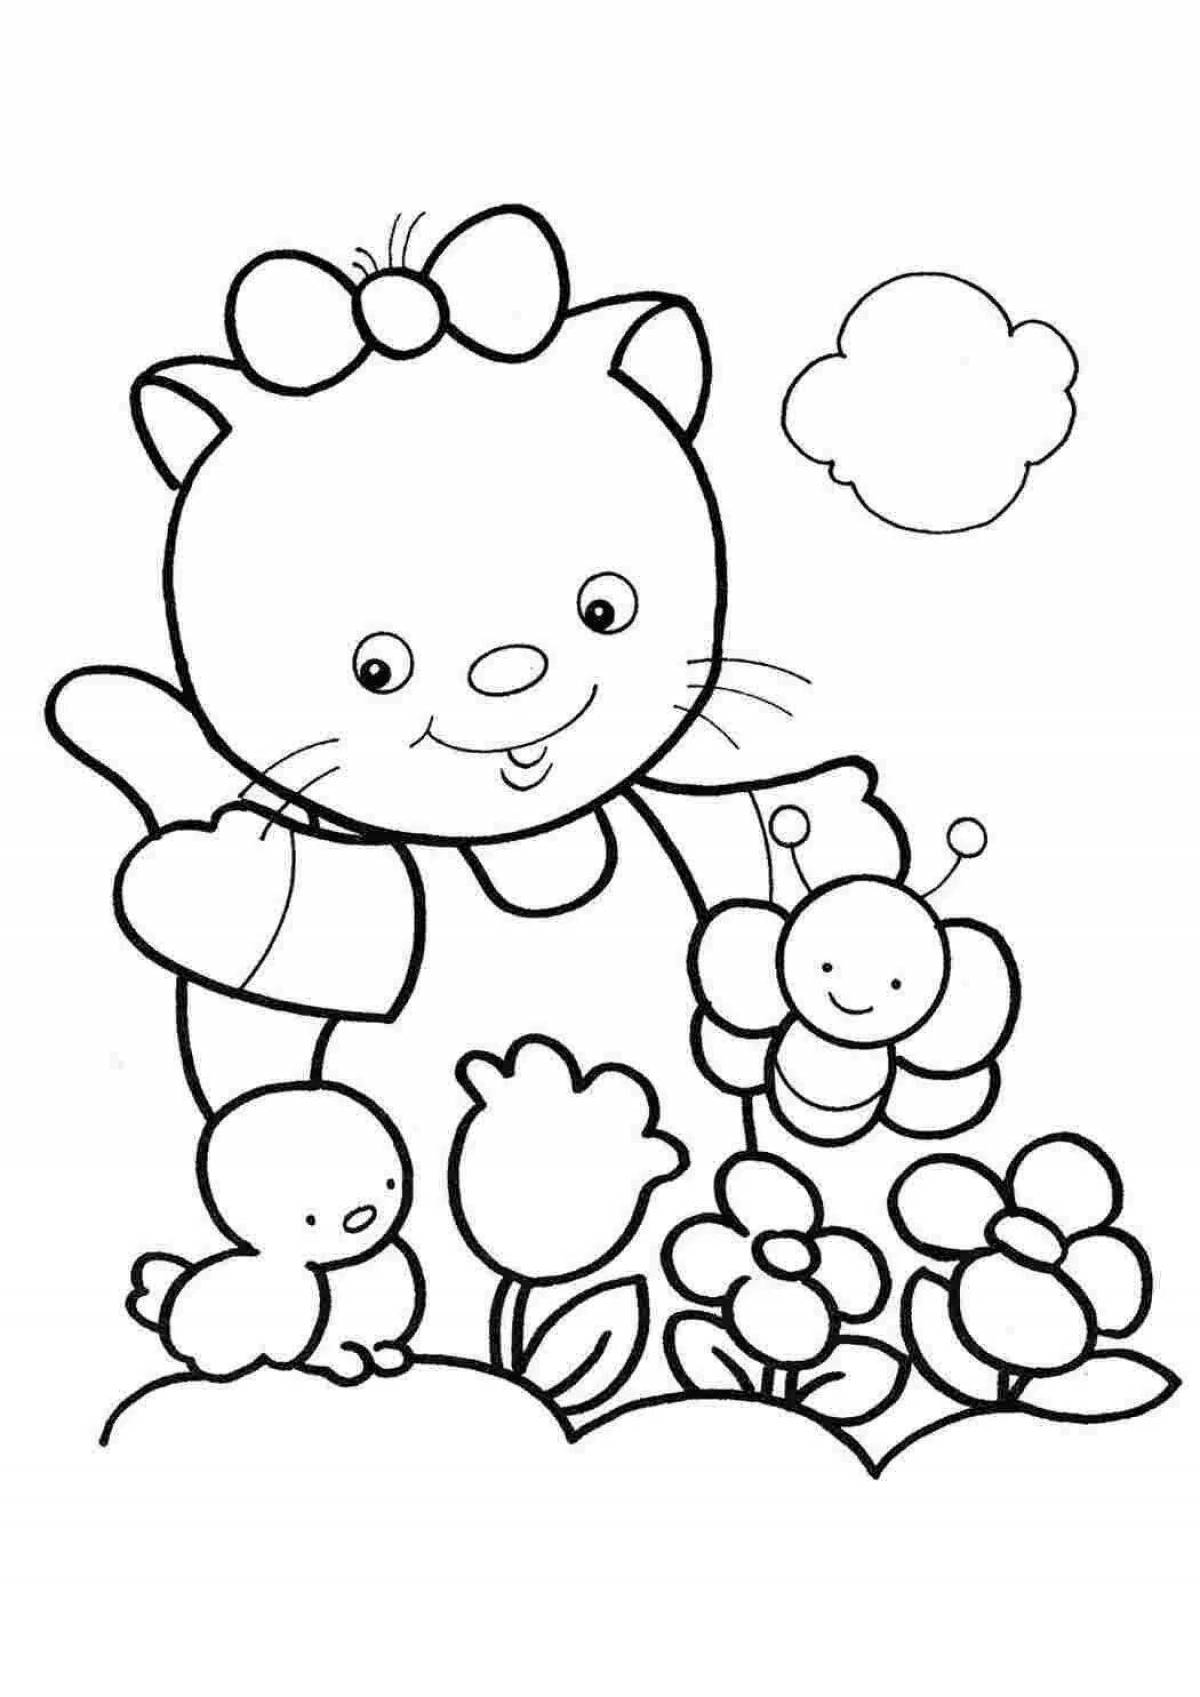 Fun coloring book for 3-4 year olds